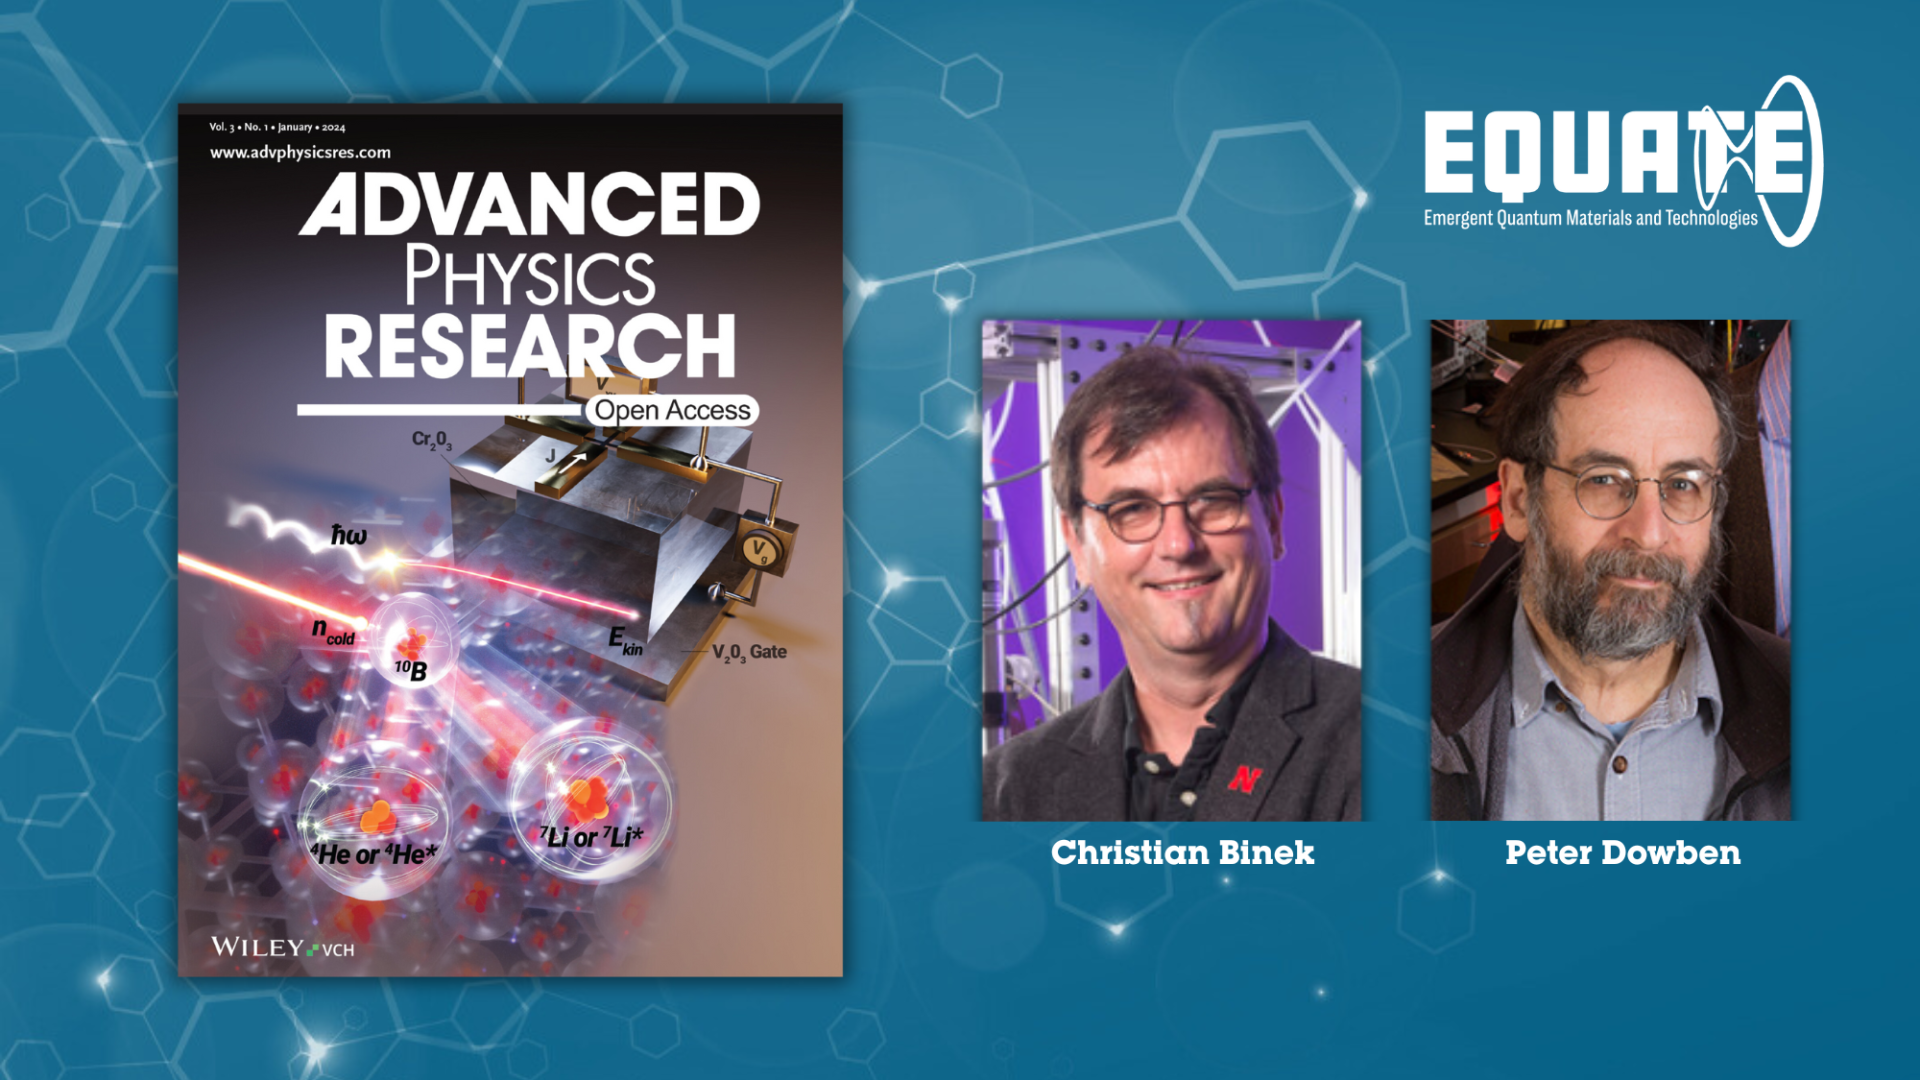 The cover image is accompanied by photos of researchers Christian Binek and Peter Dowben.